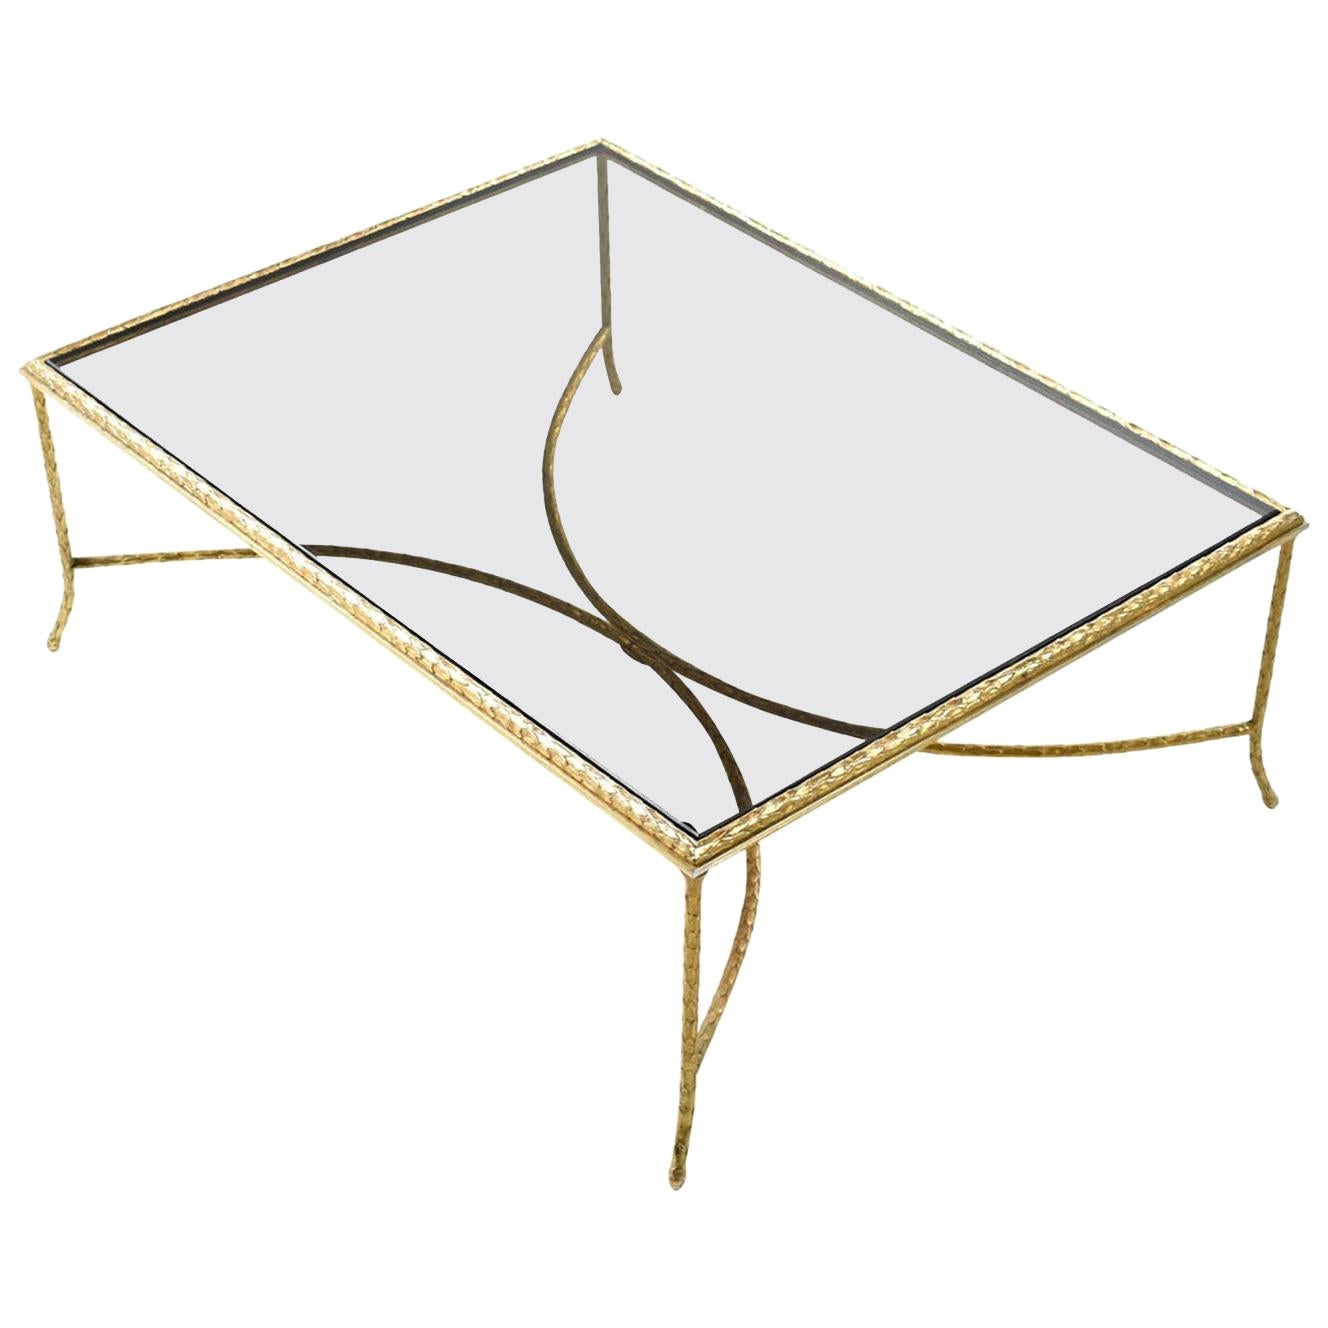 Monumental brass coffee table with delicately ornamented laurel leaf pattern throughout. The table is atypically obtuse at four feet long and three feet wide. Although massive in scale, the narrow gold rods make the table appear dainty. Air moves